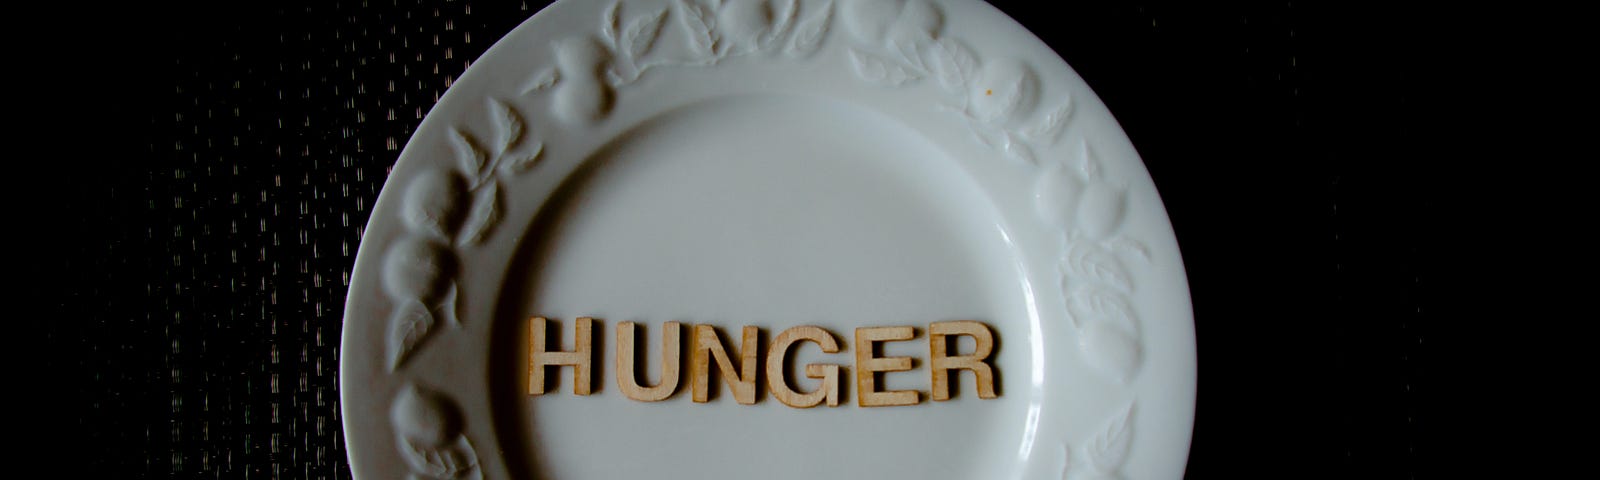 A plate with the word Hunger written on it.